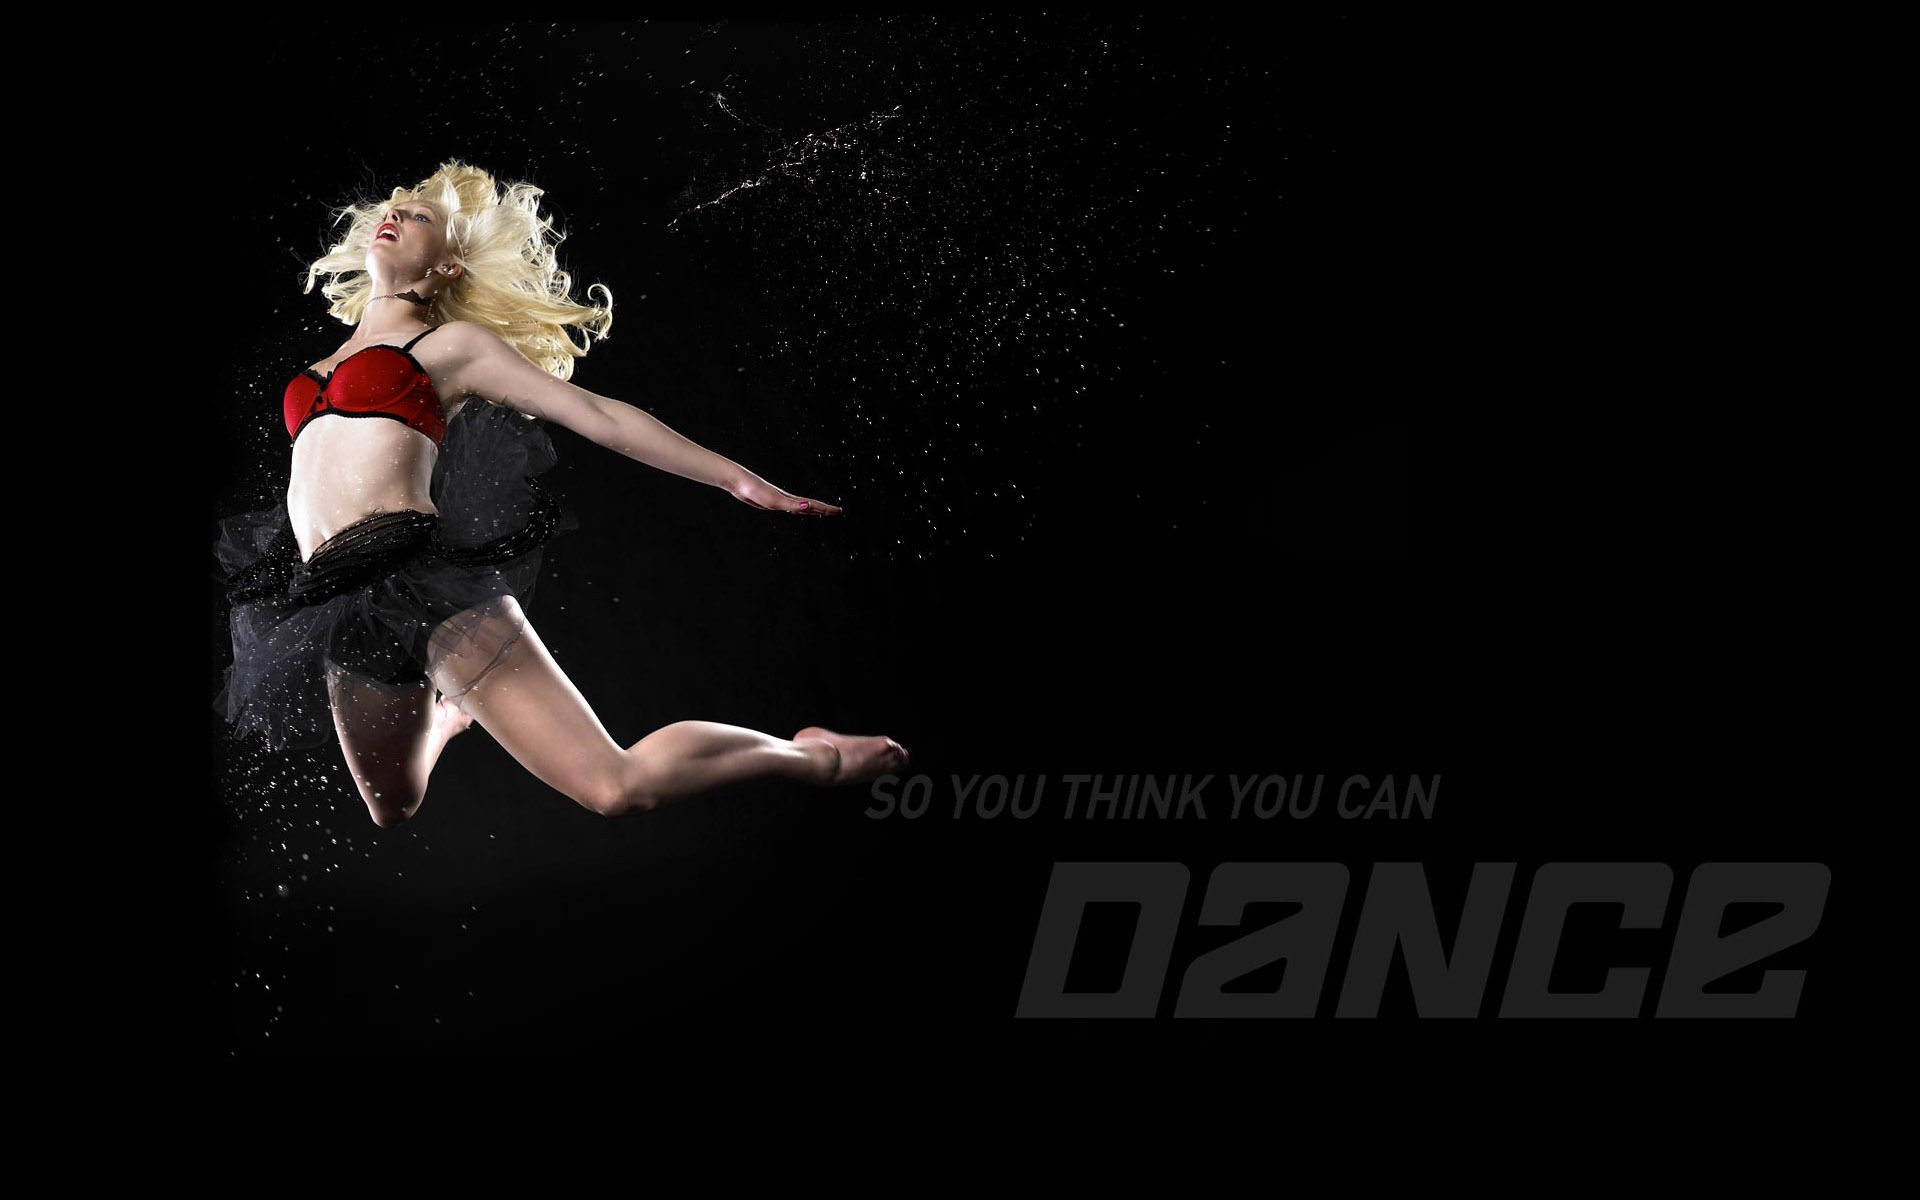 So You Think You Can Dance Wallpaper (1) #13 - 1920x1200